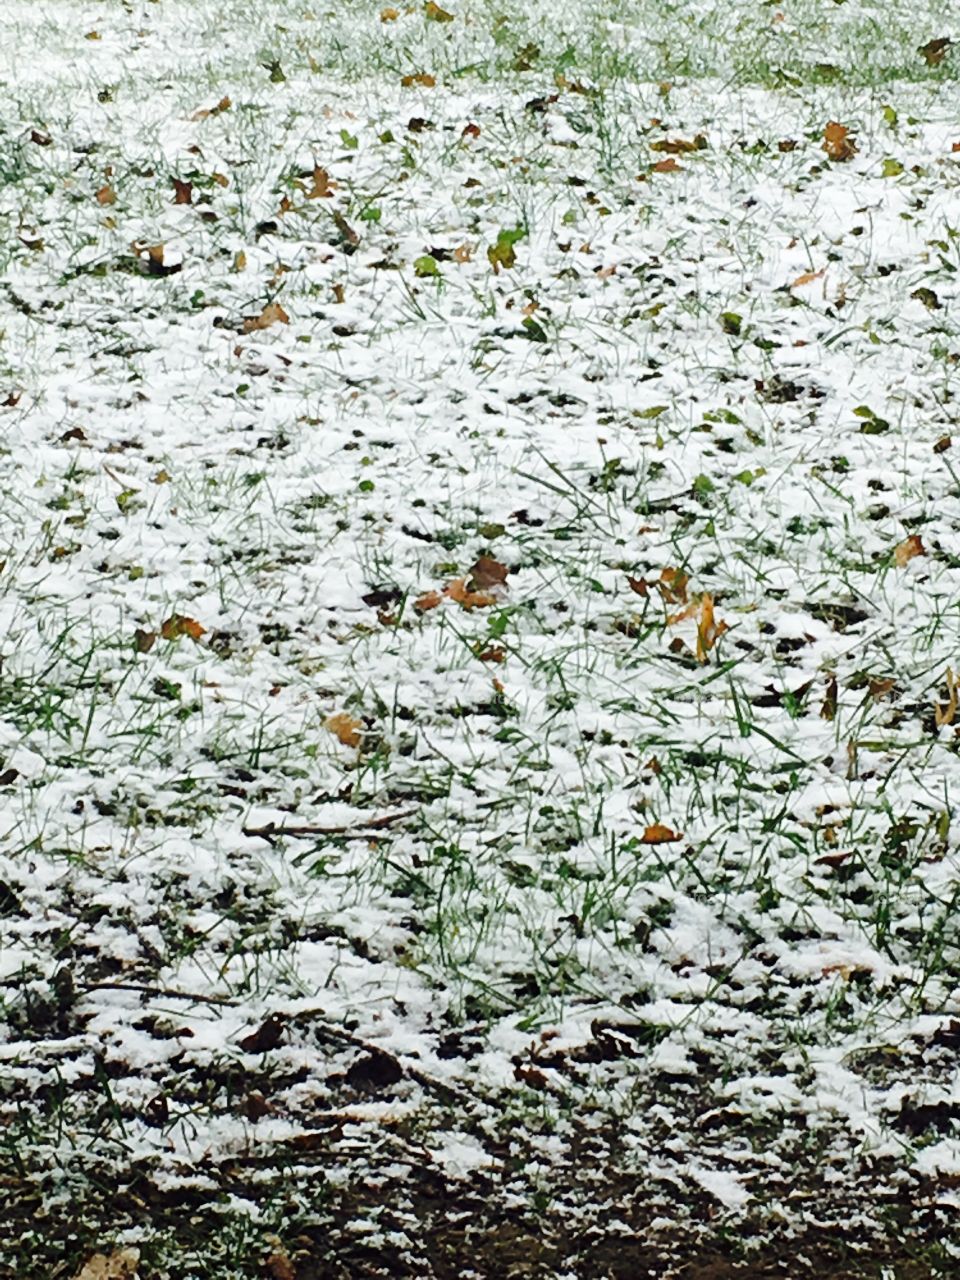 Signs of the first snow